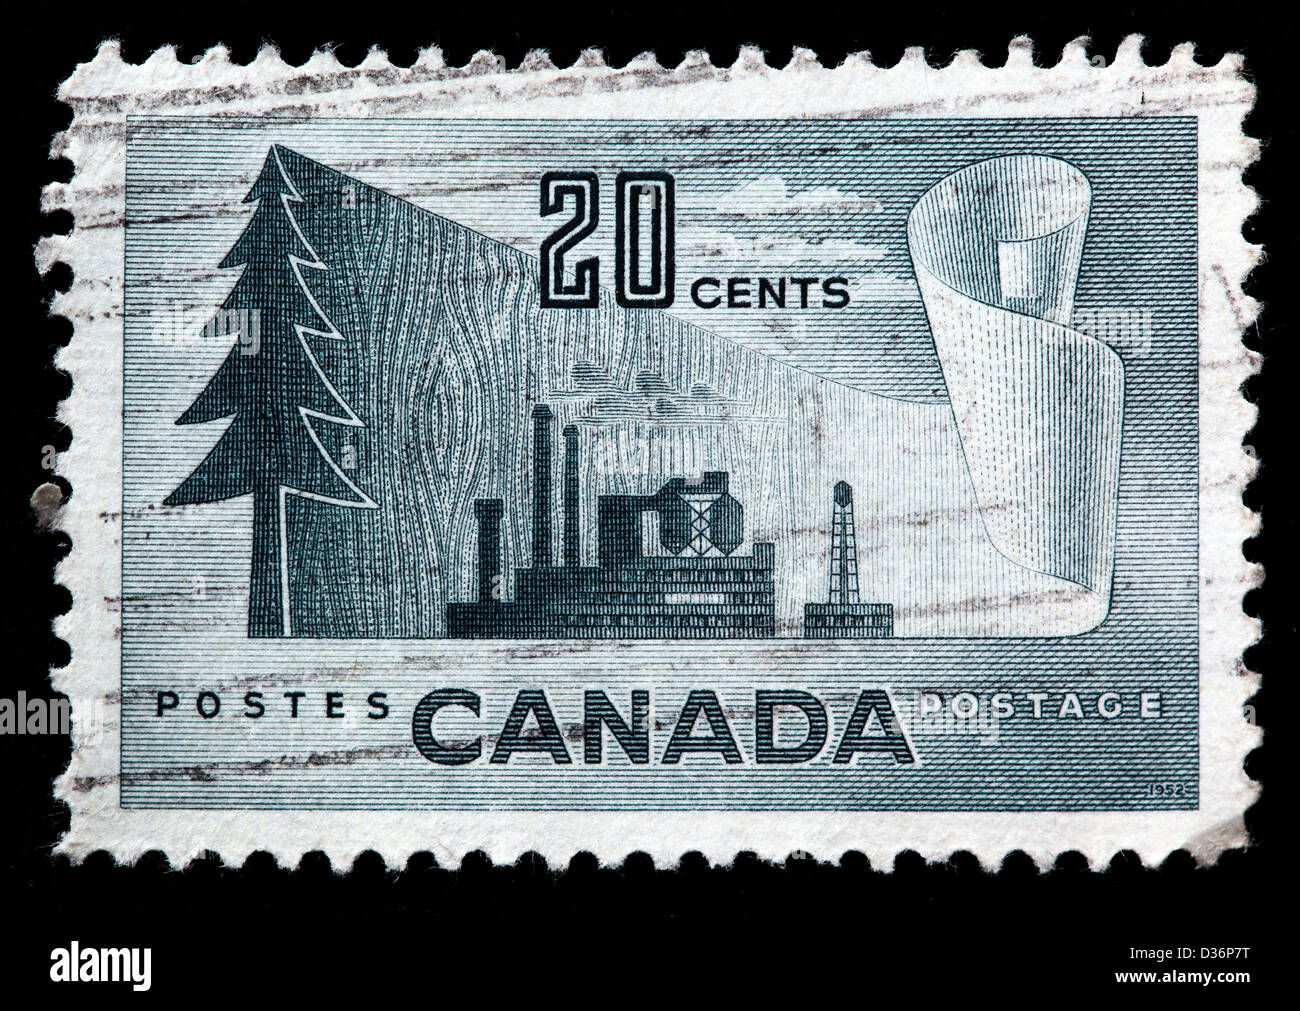 Paper production factory, postage stamp, Canada, 1952 Stock Photo